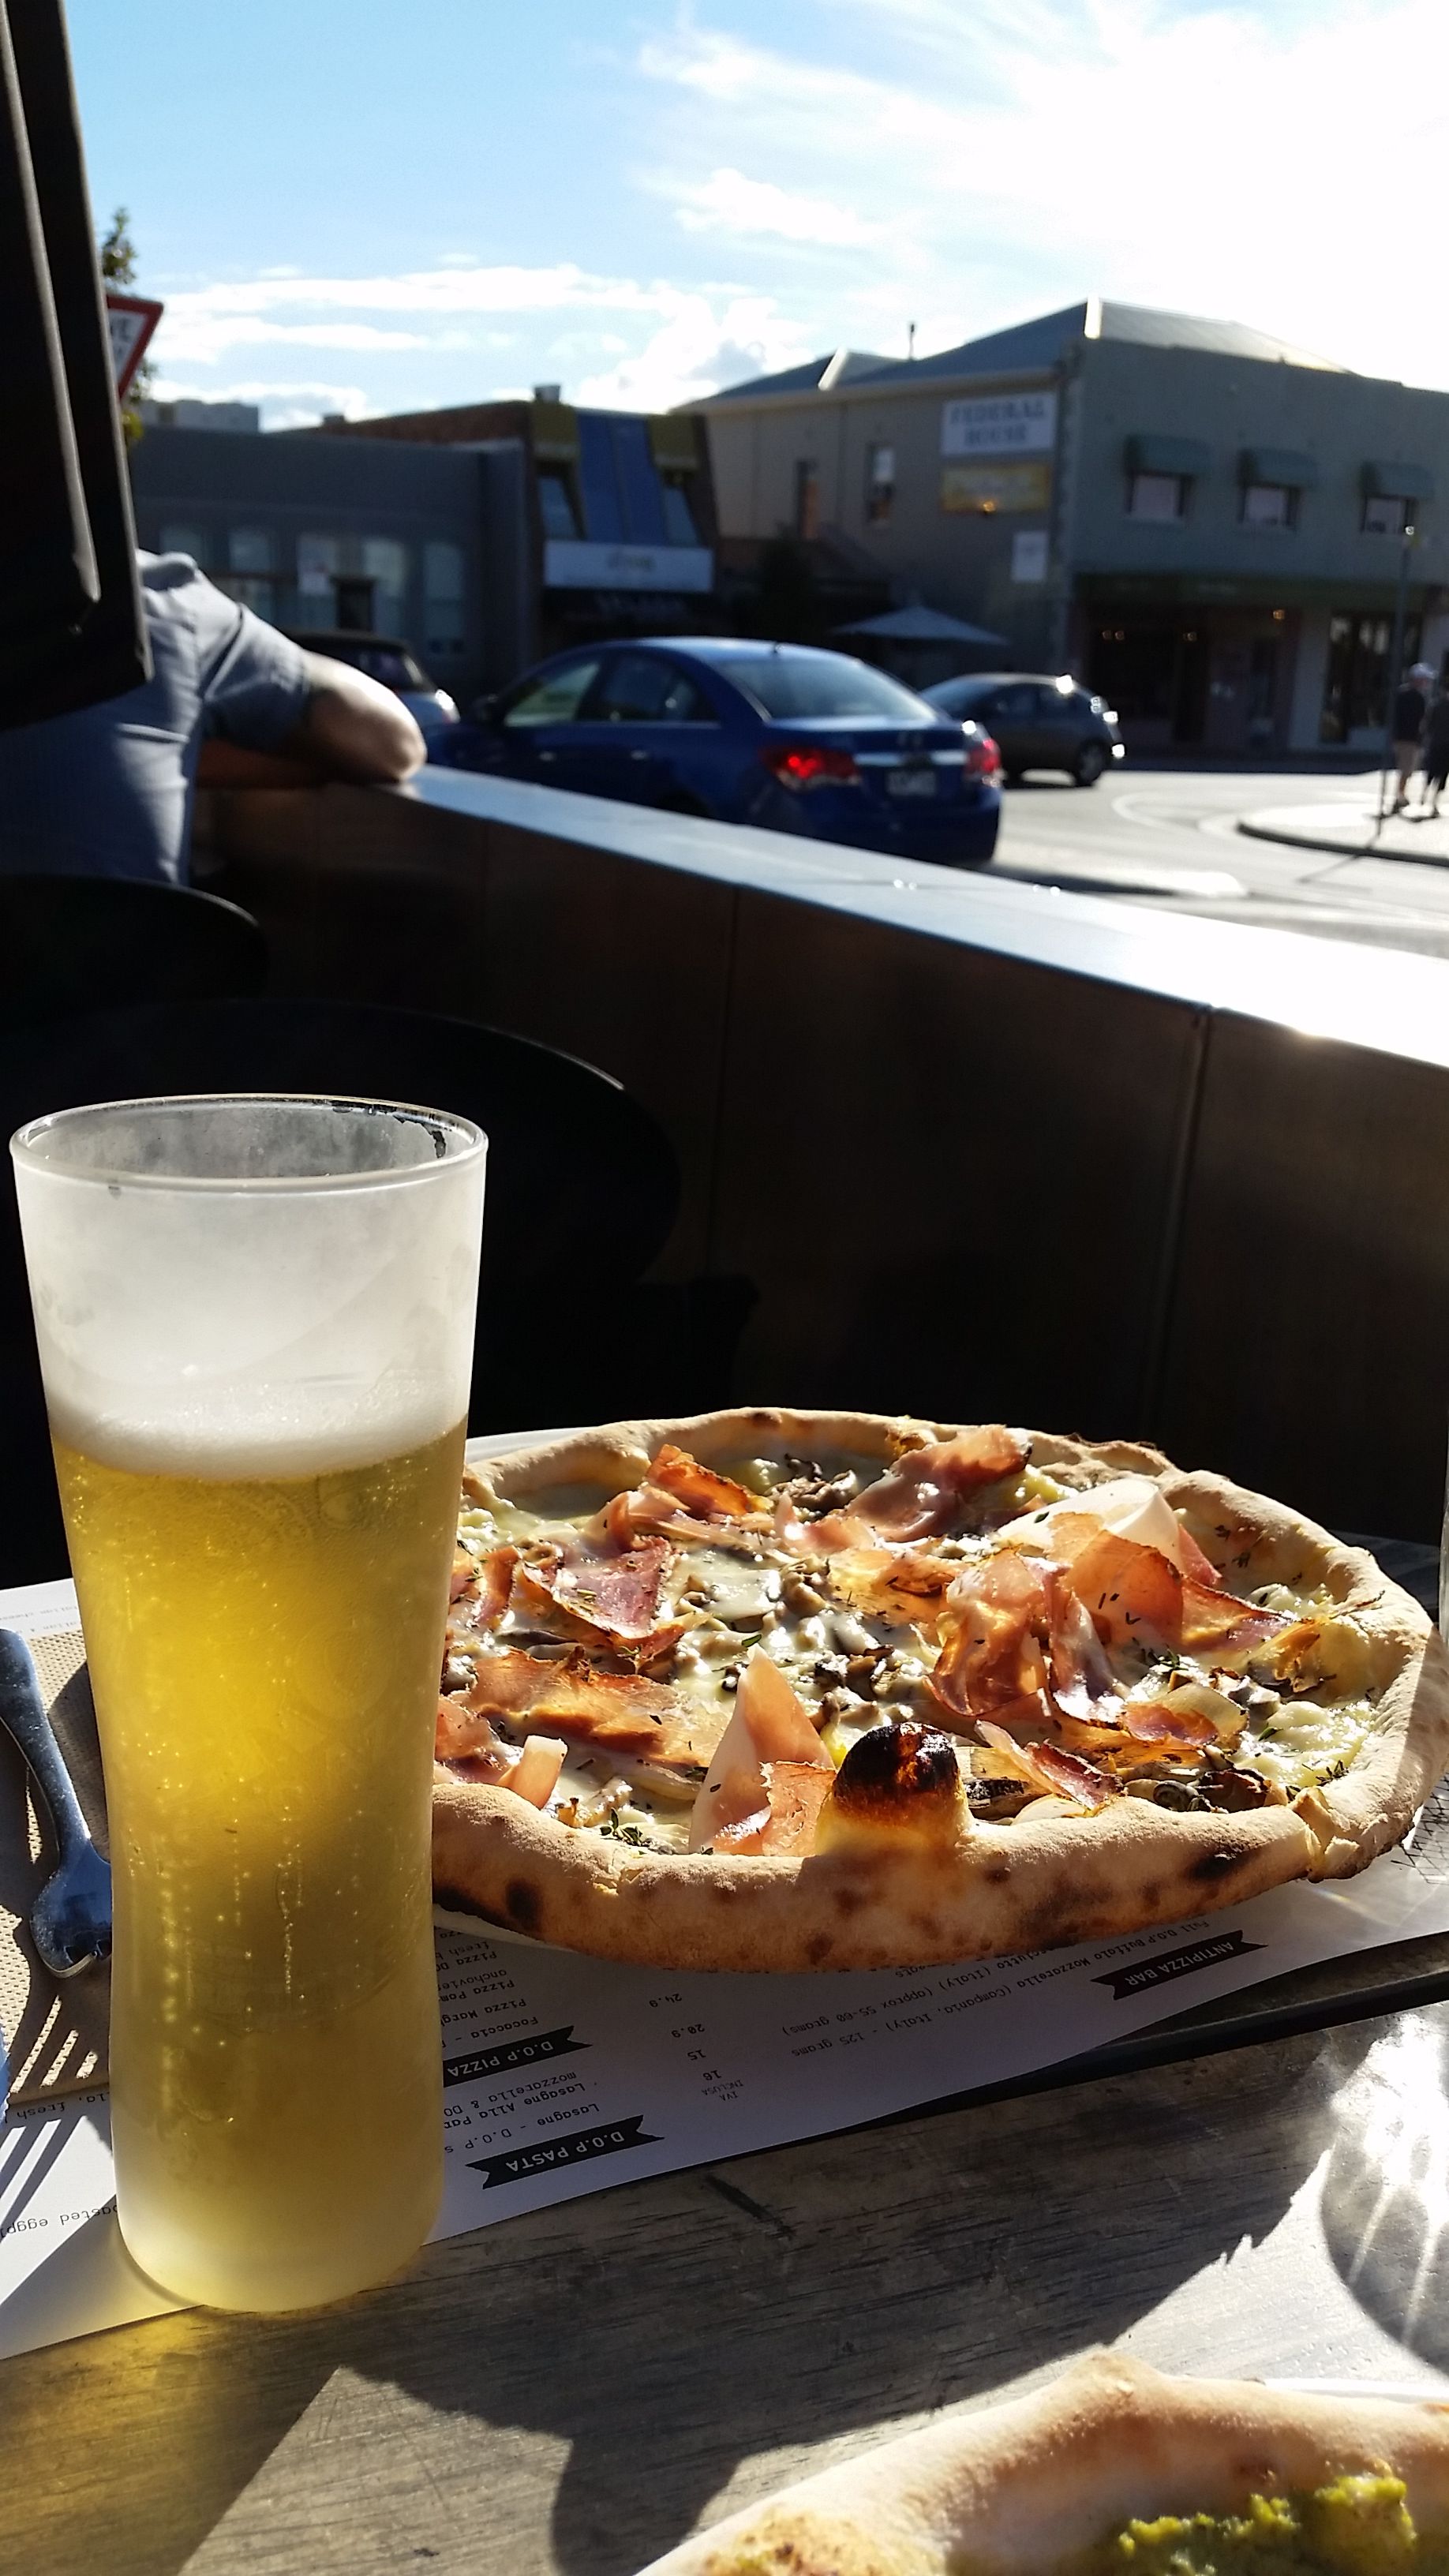 My favourite pizza place in Melbourne (5 original photos) — Steemit